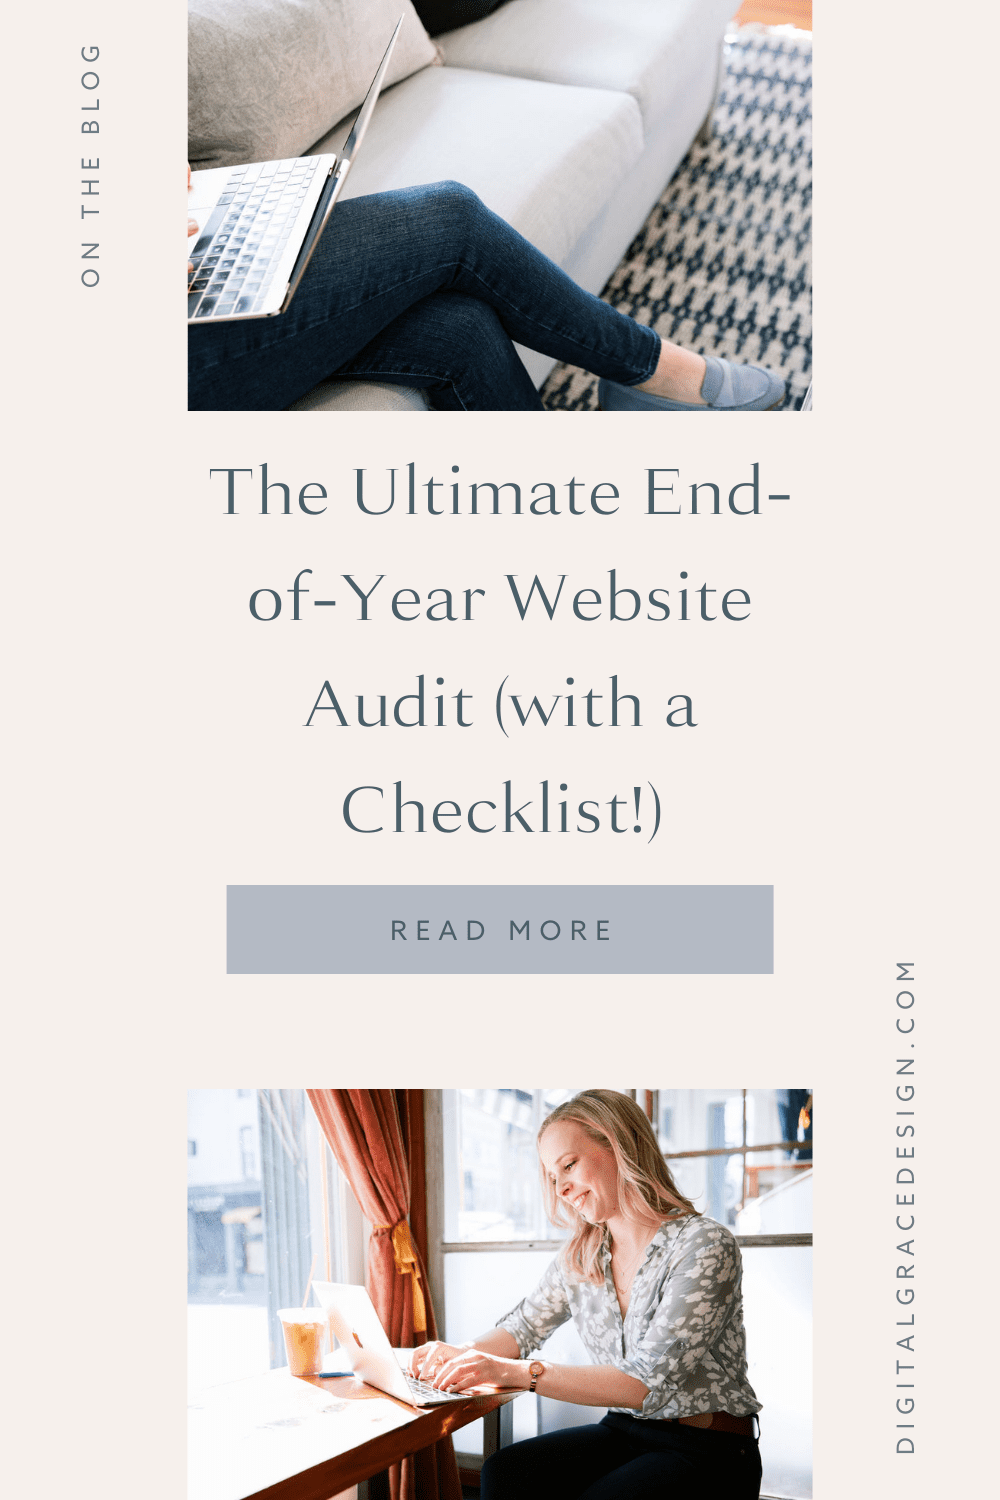 The Ultimate End-of-Year Website Audit (with a Checklist!)